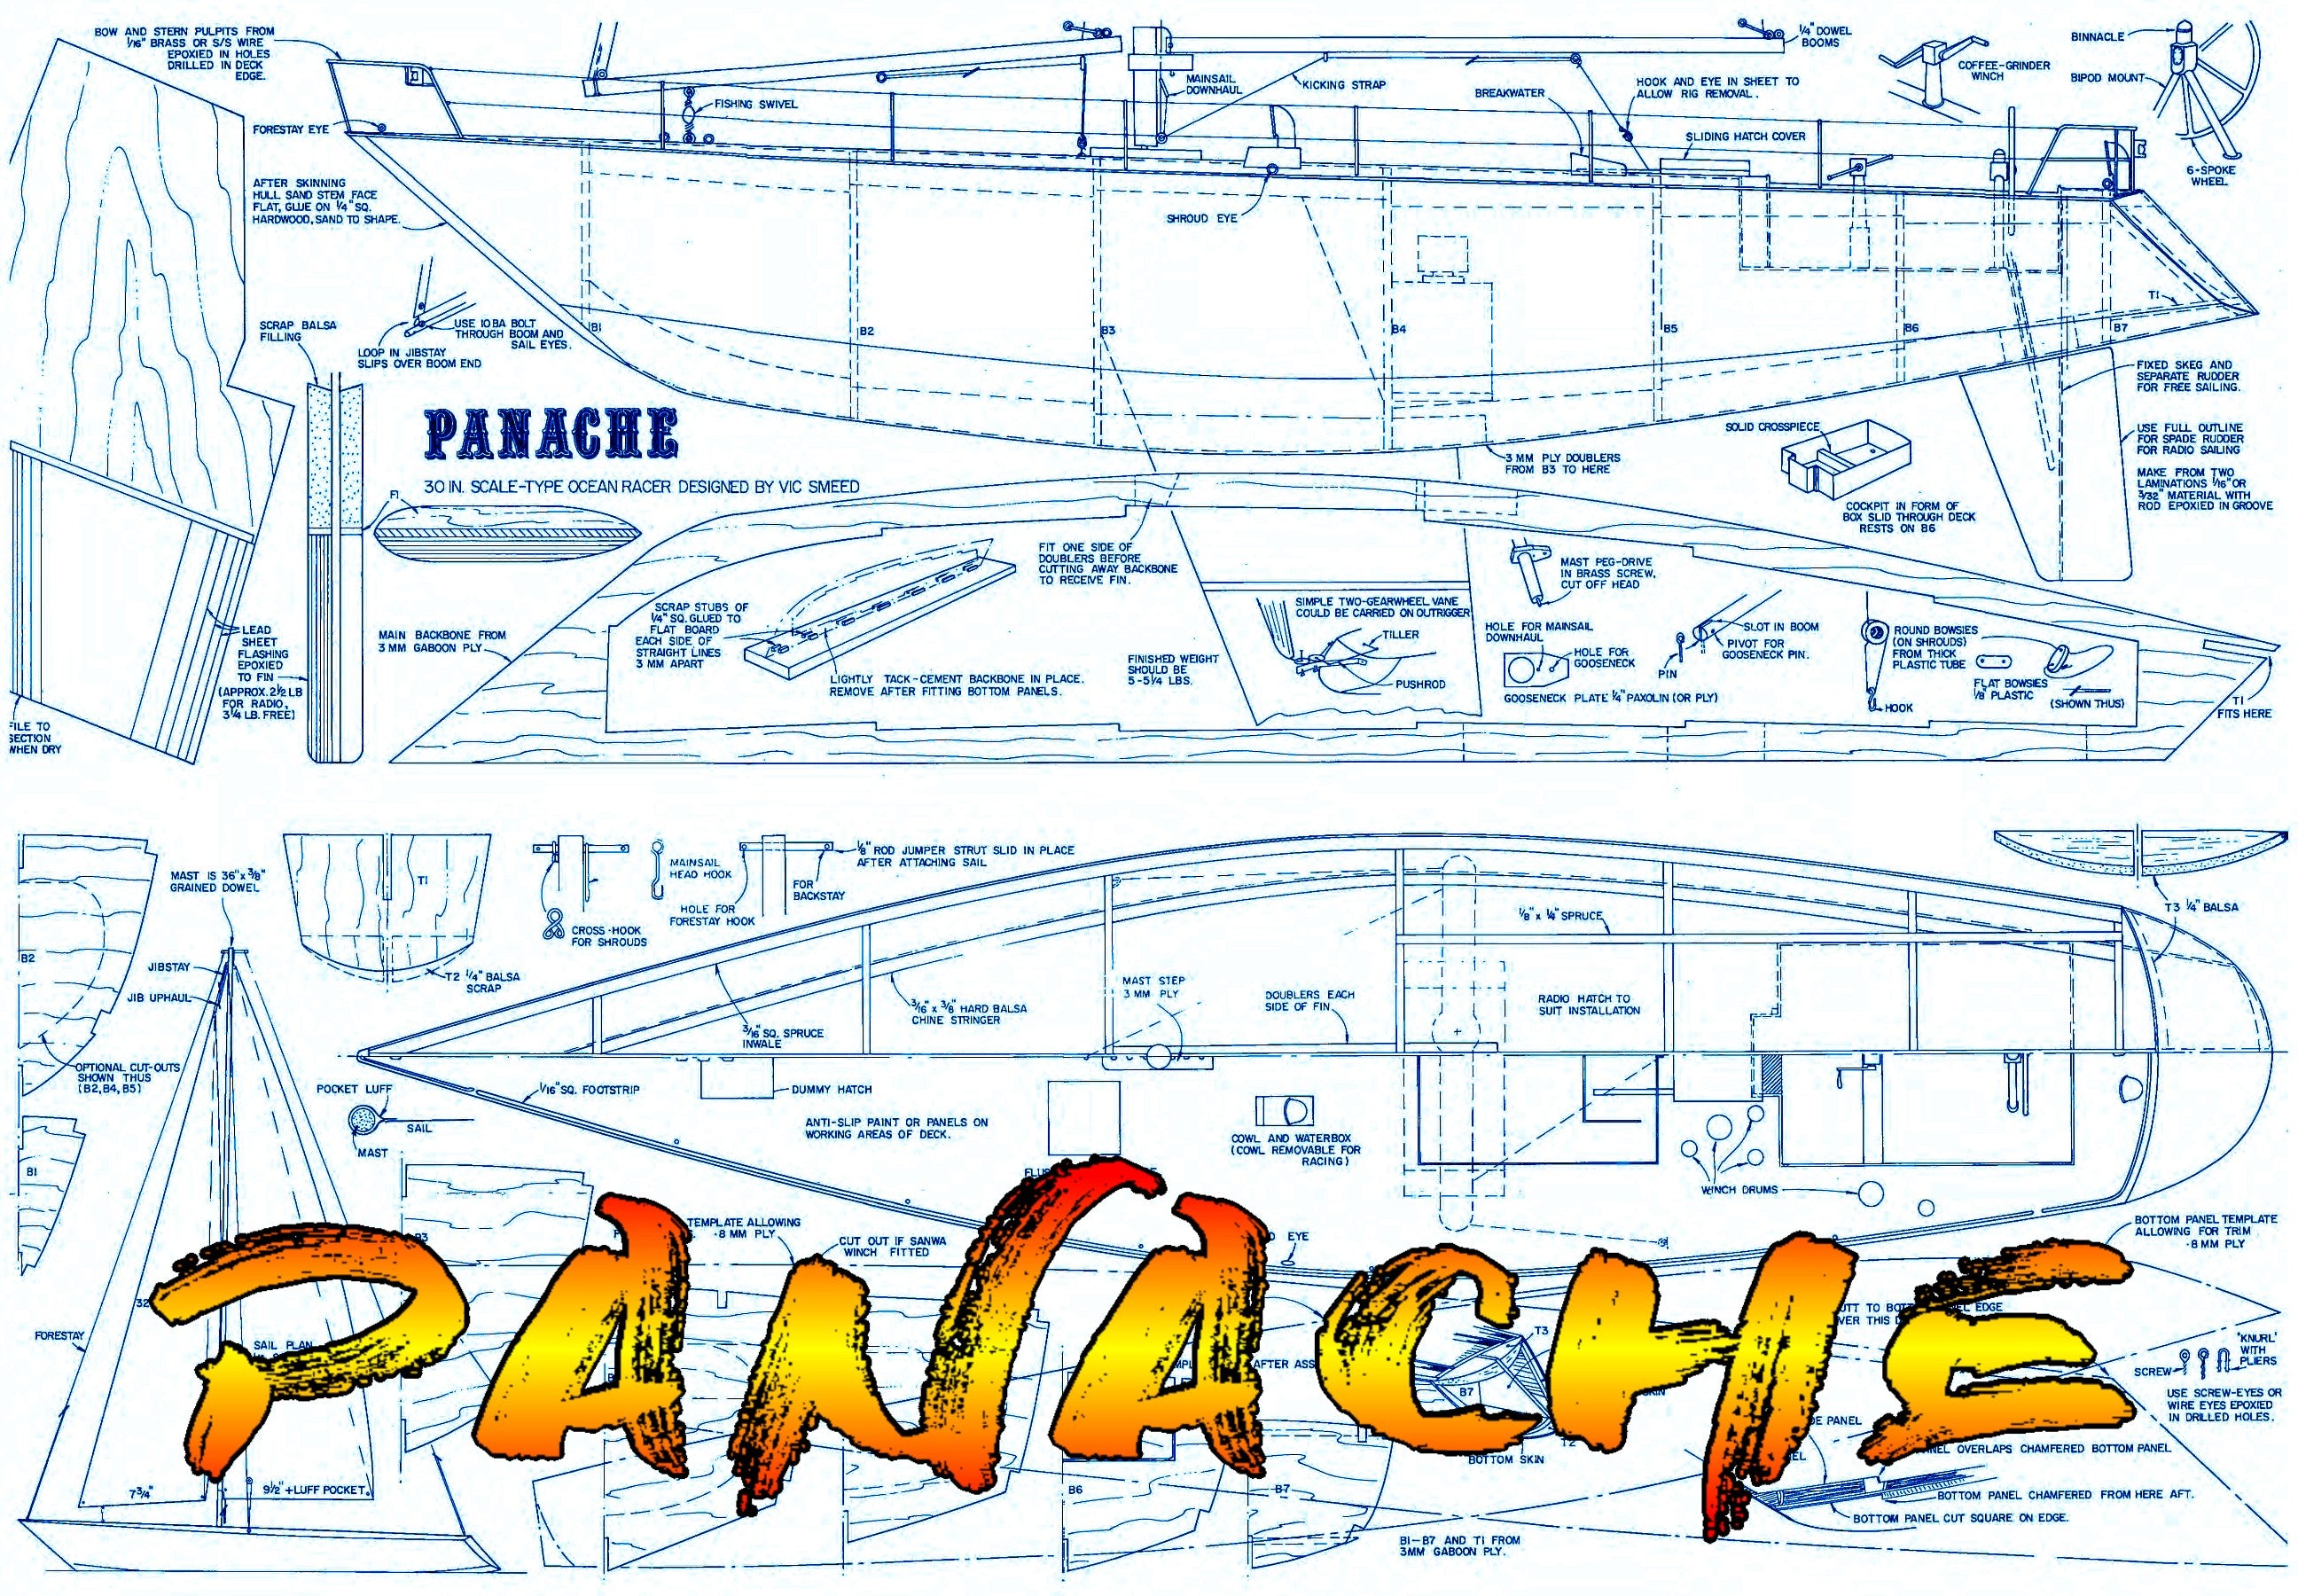 full size printed plans  scale 1:12 ocean racer sailboat 30" suitable for radio control